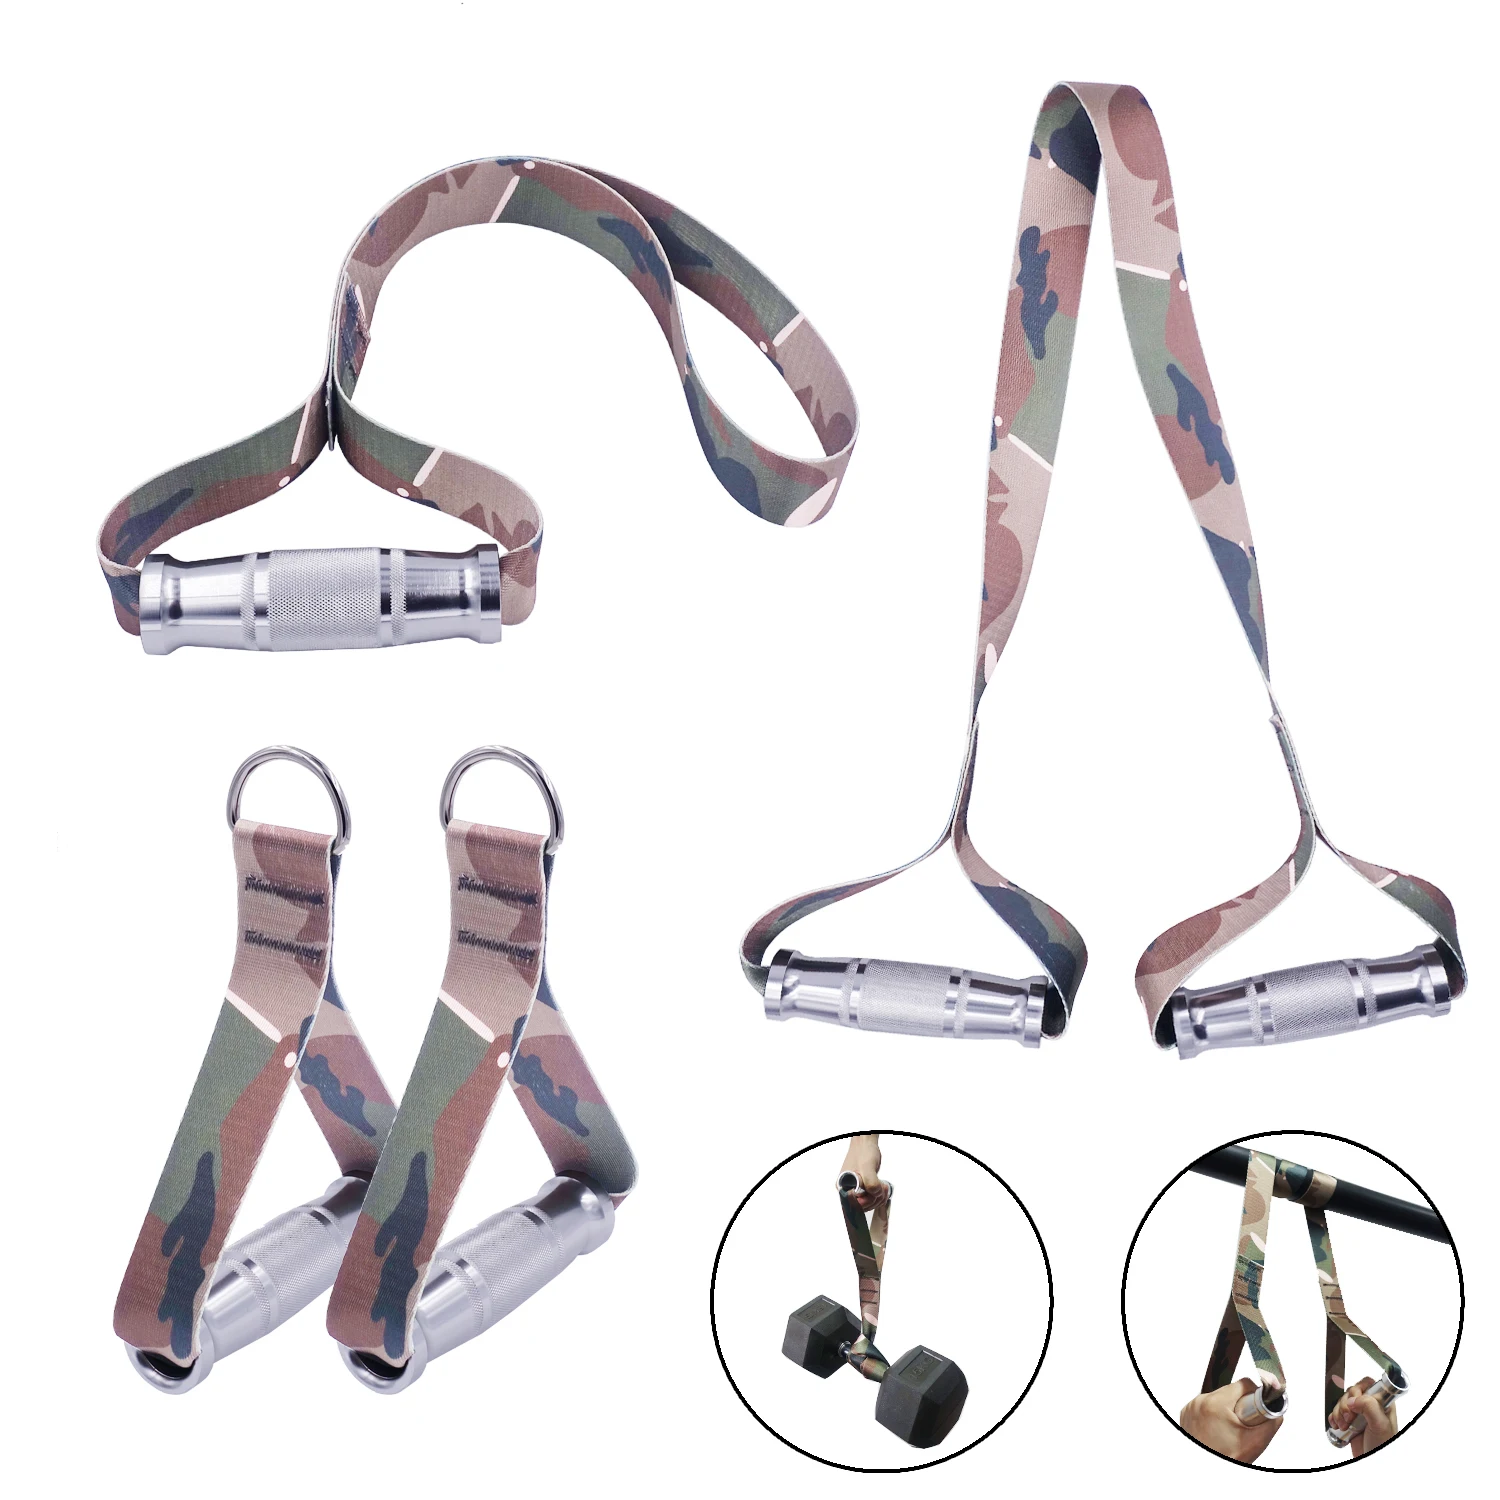 

Camouflage Heavy Duty Gym Handle Grips Strap for Home Cable Machines Pull Ups Training Deadlift Weightlifting Workout Equipment